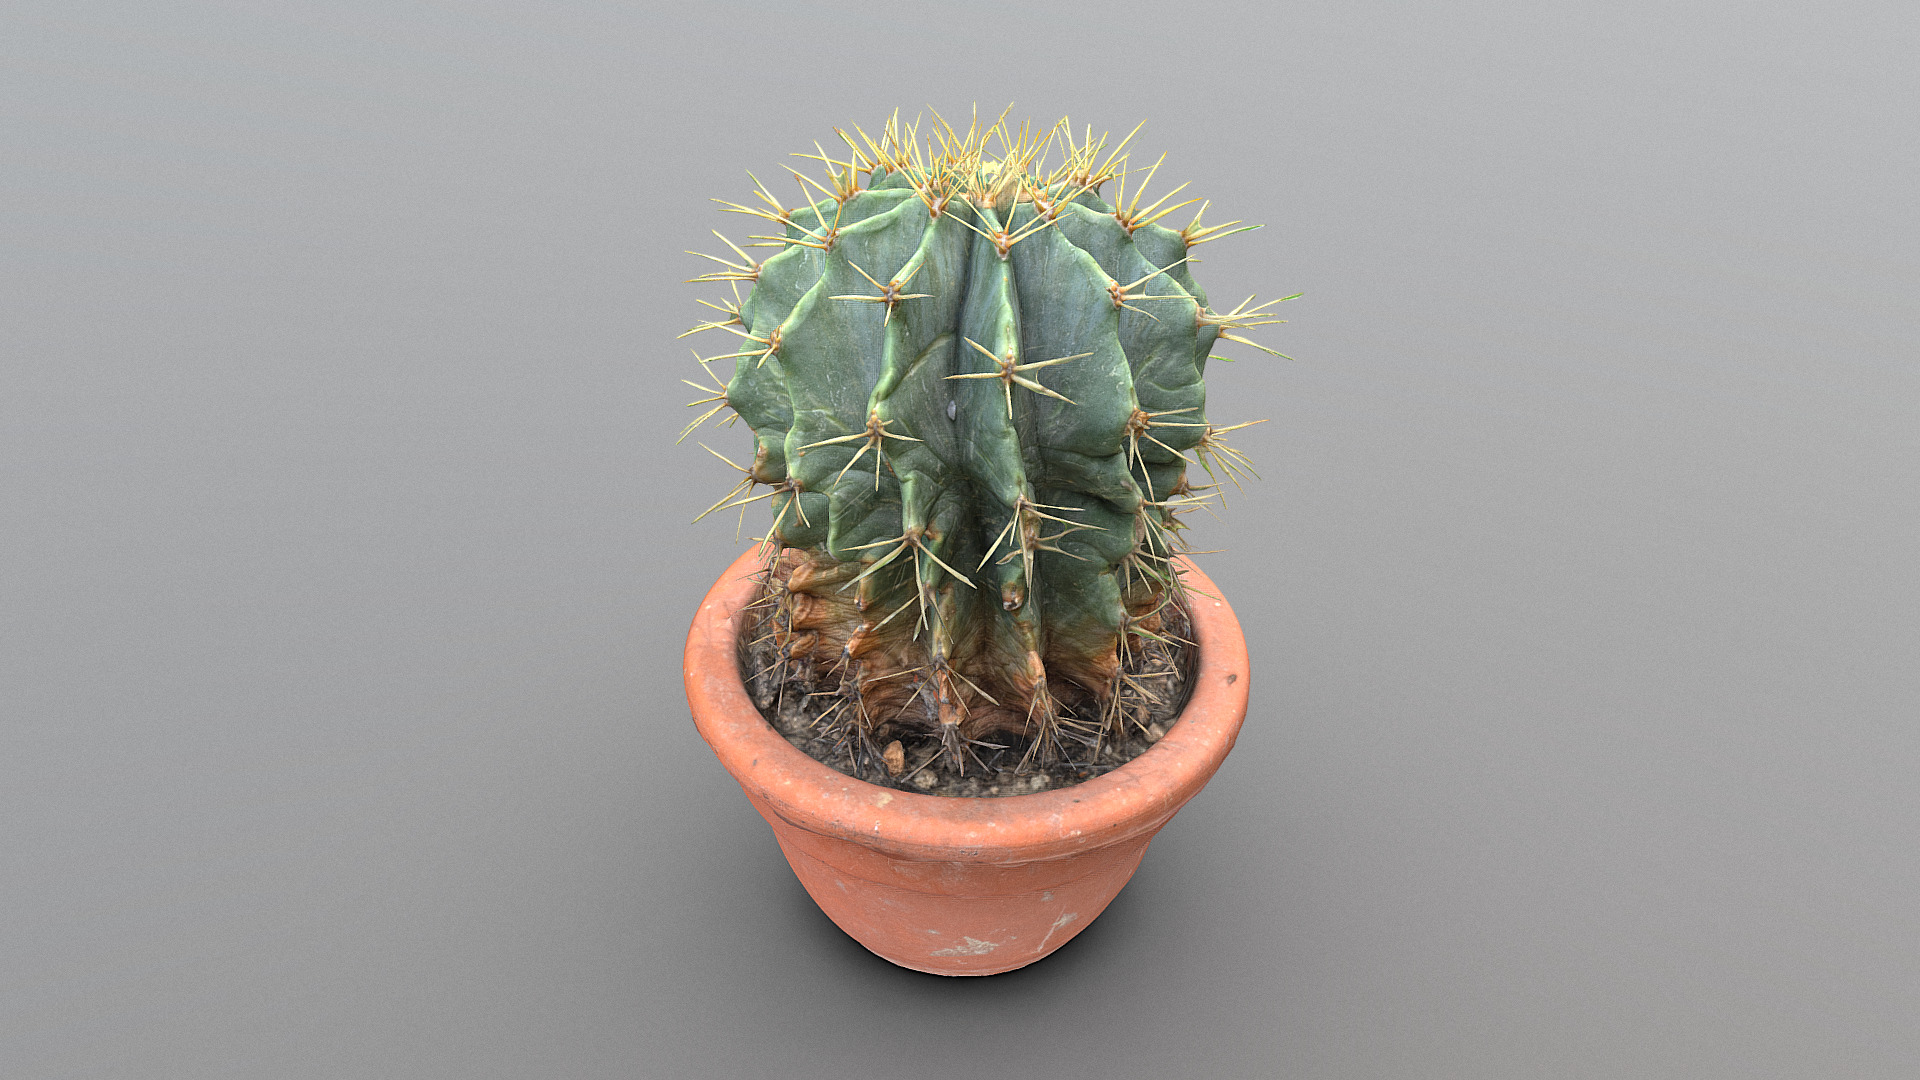 3D model Cactus in pot - This is a 3D model of the Cactus in pot. The 3D model is about a potted cactus with a green plant in it.